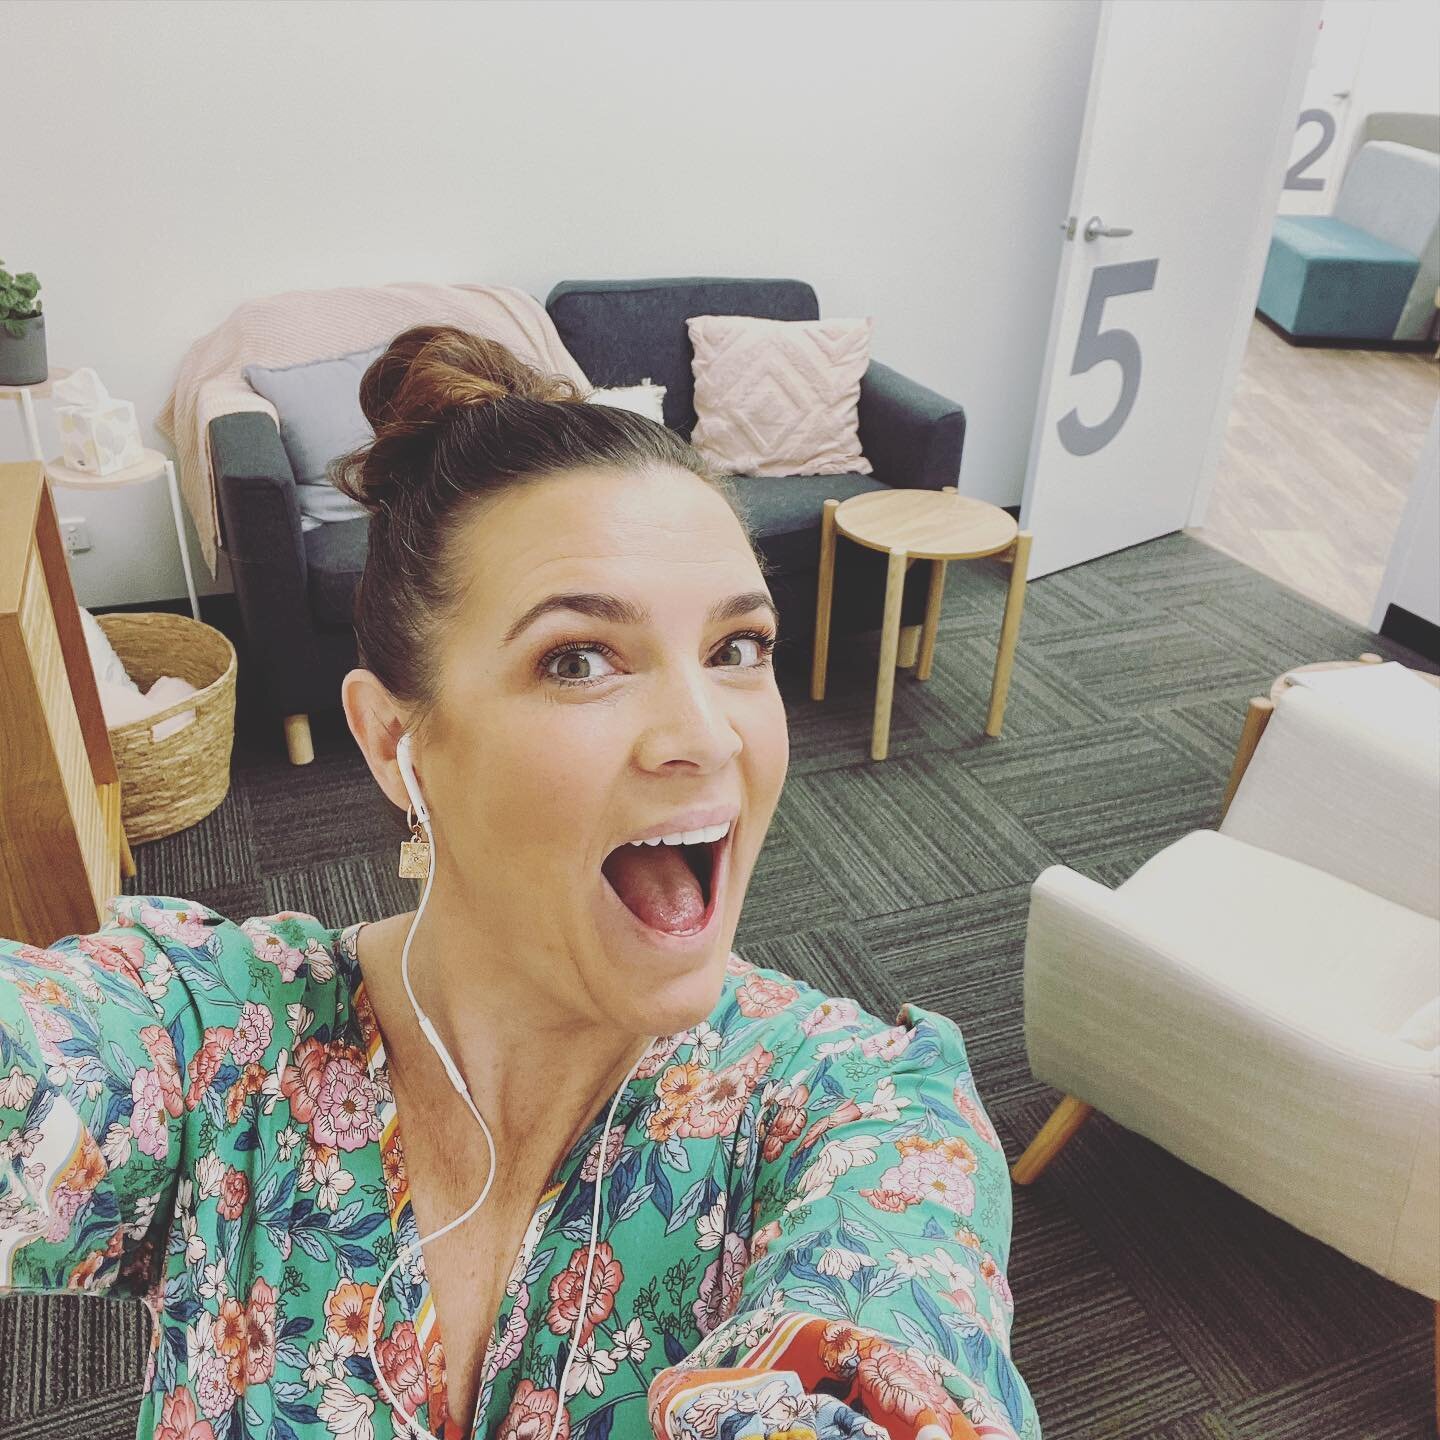 F I R S T  D A Y  E X C I T E M E N T &hellip; this is me just casually being super-casual on the birth-day of Great Minds Therapy and ADHD Services - ready to see my first clients. To say I&rsquo;m excited to share my new business with the world and